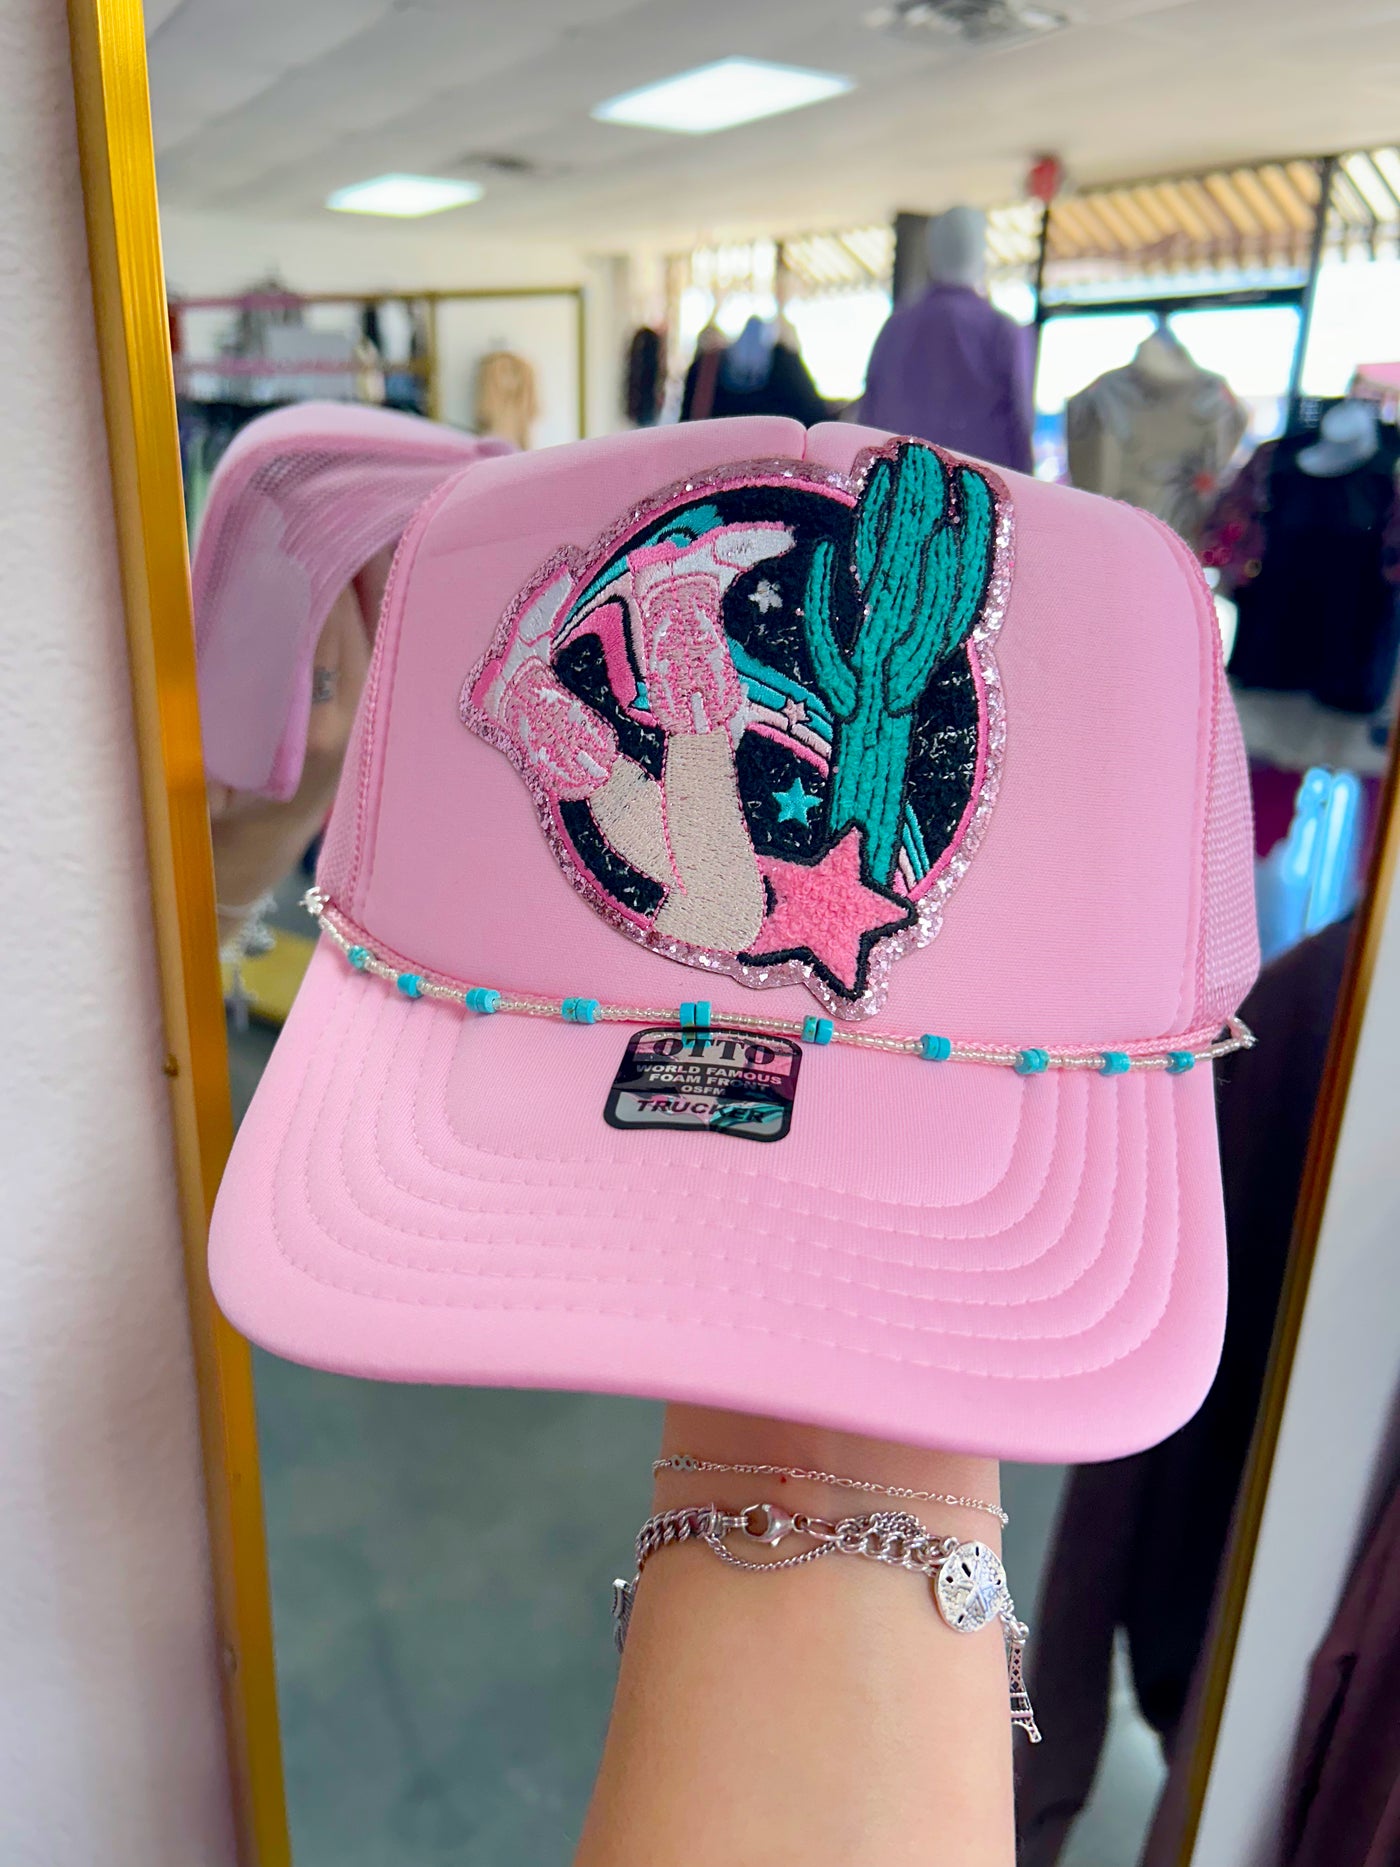 Space Cowgirl Trucker Hat